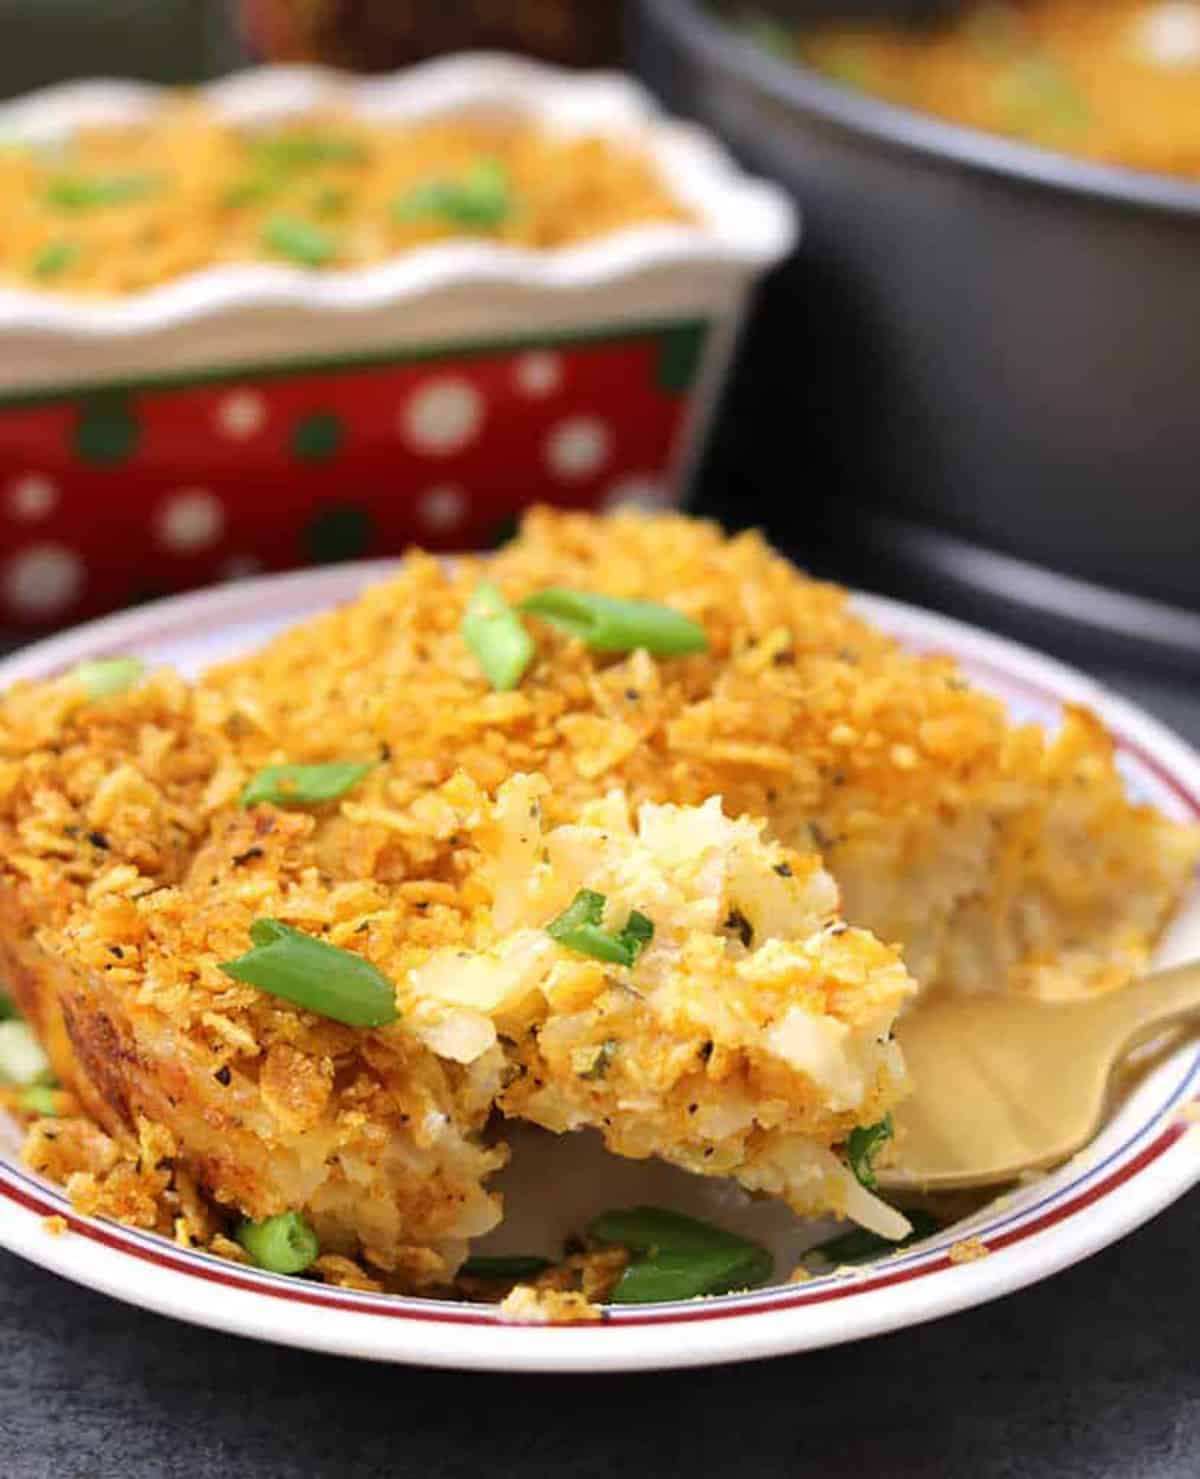 creamy and cheesy potato casserole with crispy cornflake topping served in a white appetizer plate.